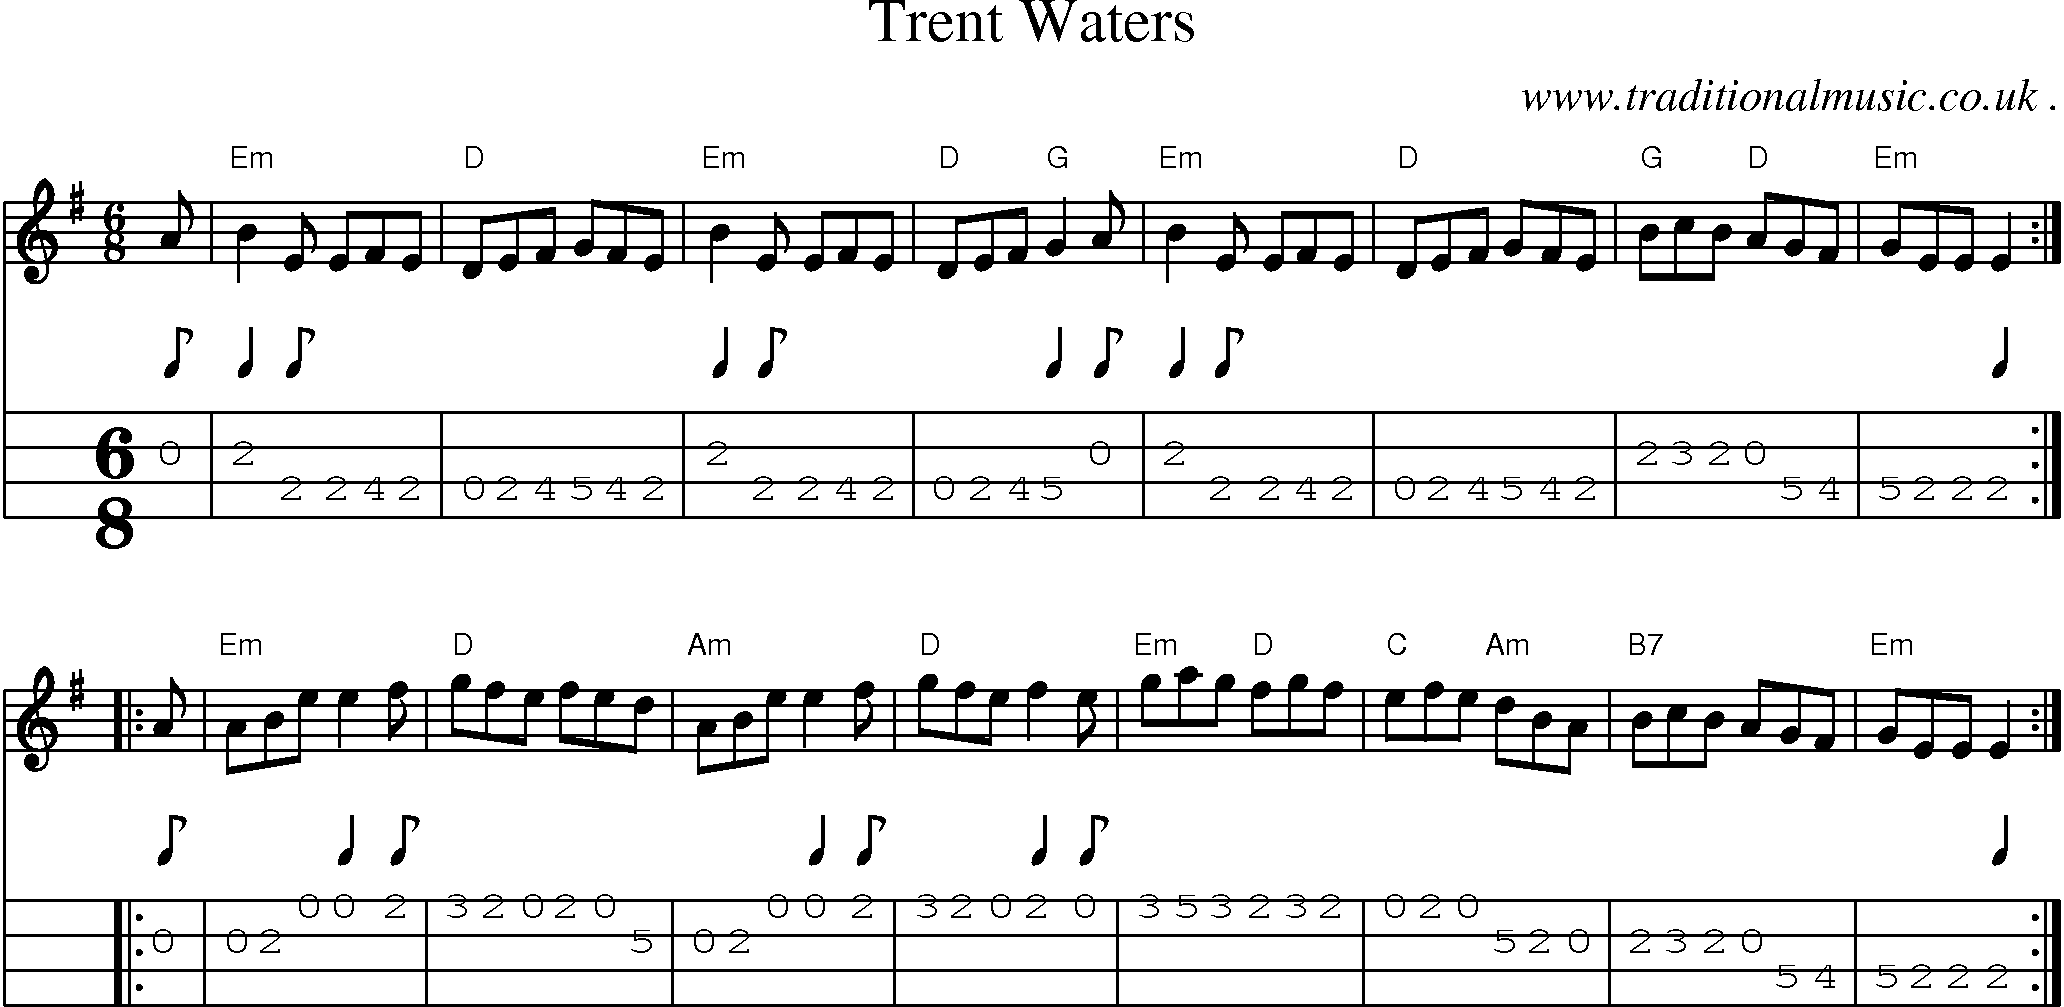 Sheet-music  score, Chords and Mandolin Tabs for Trent Waters